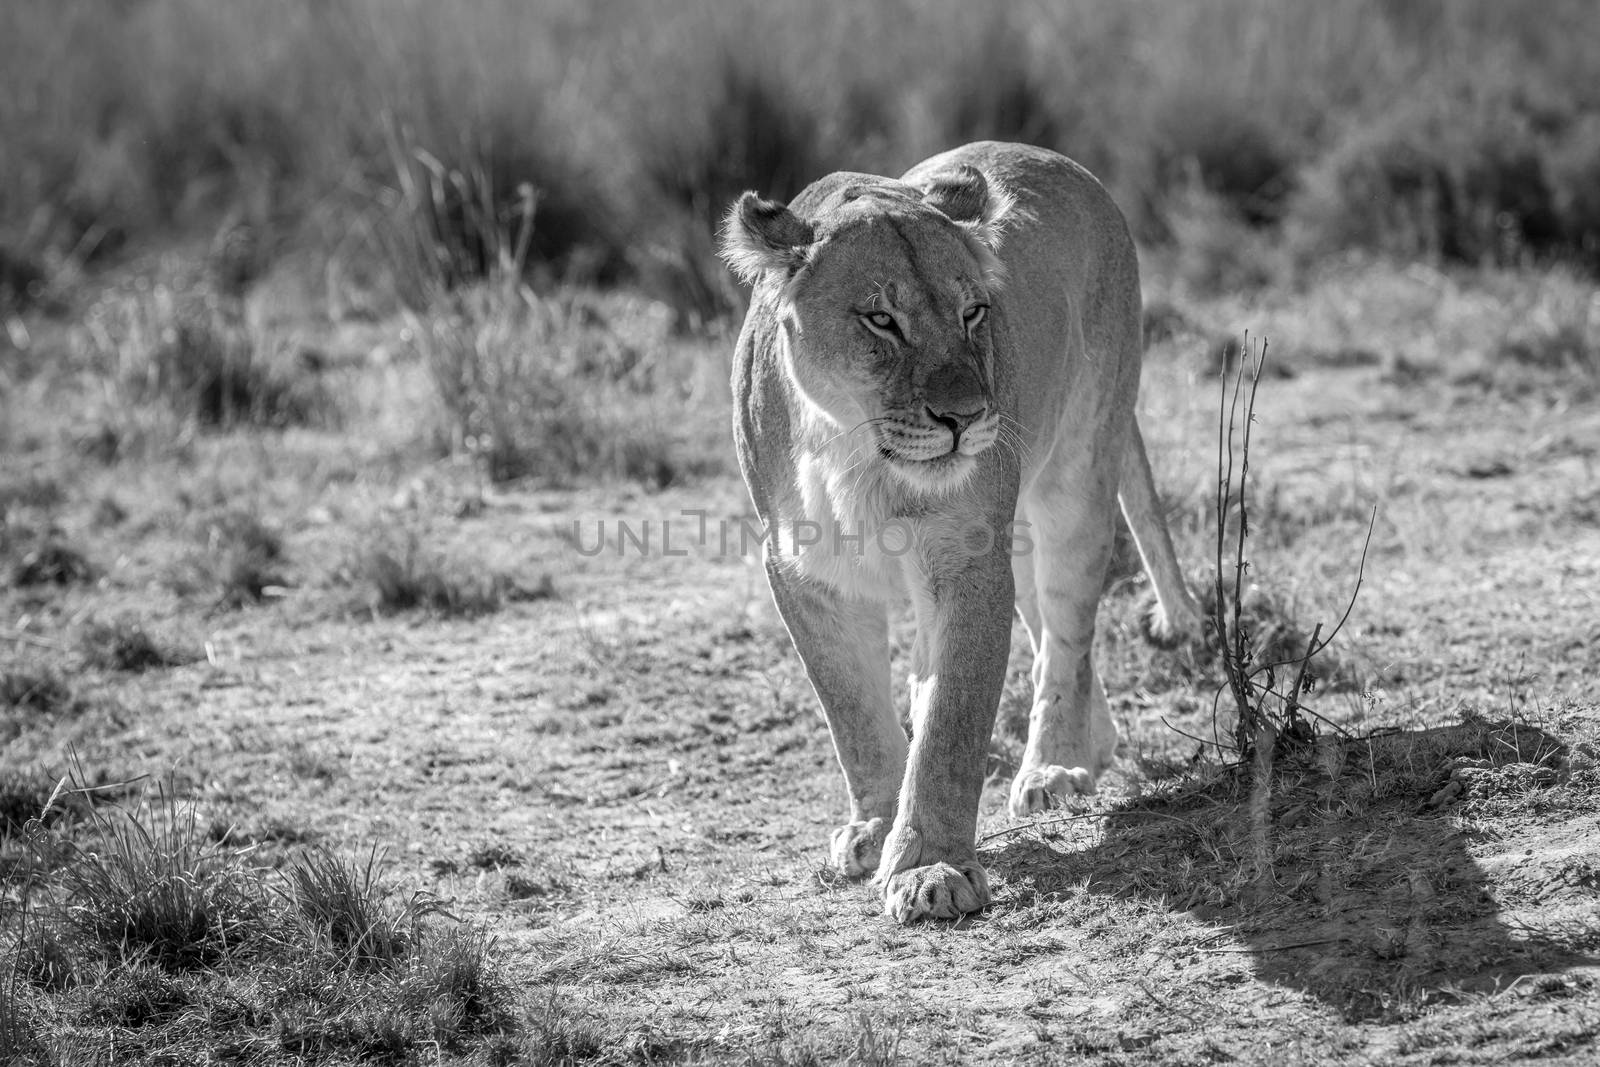 Lioness walking towards the camera in black and white in the Welgevonden game reserve, South Africa.